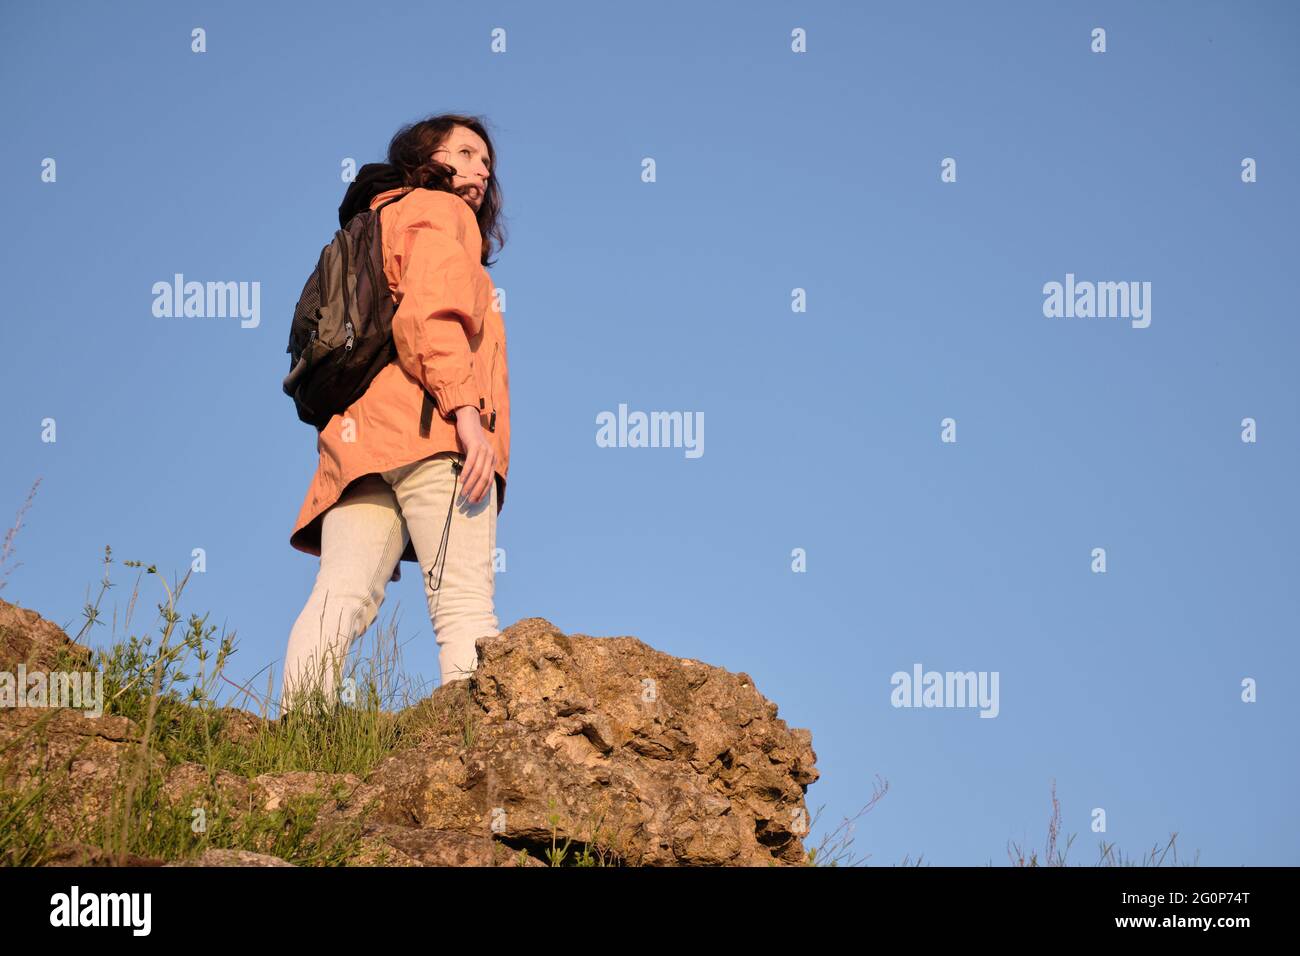 The girl climbs a rocky mountain. Travel outside the city alone. Stock Photo